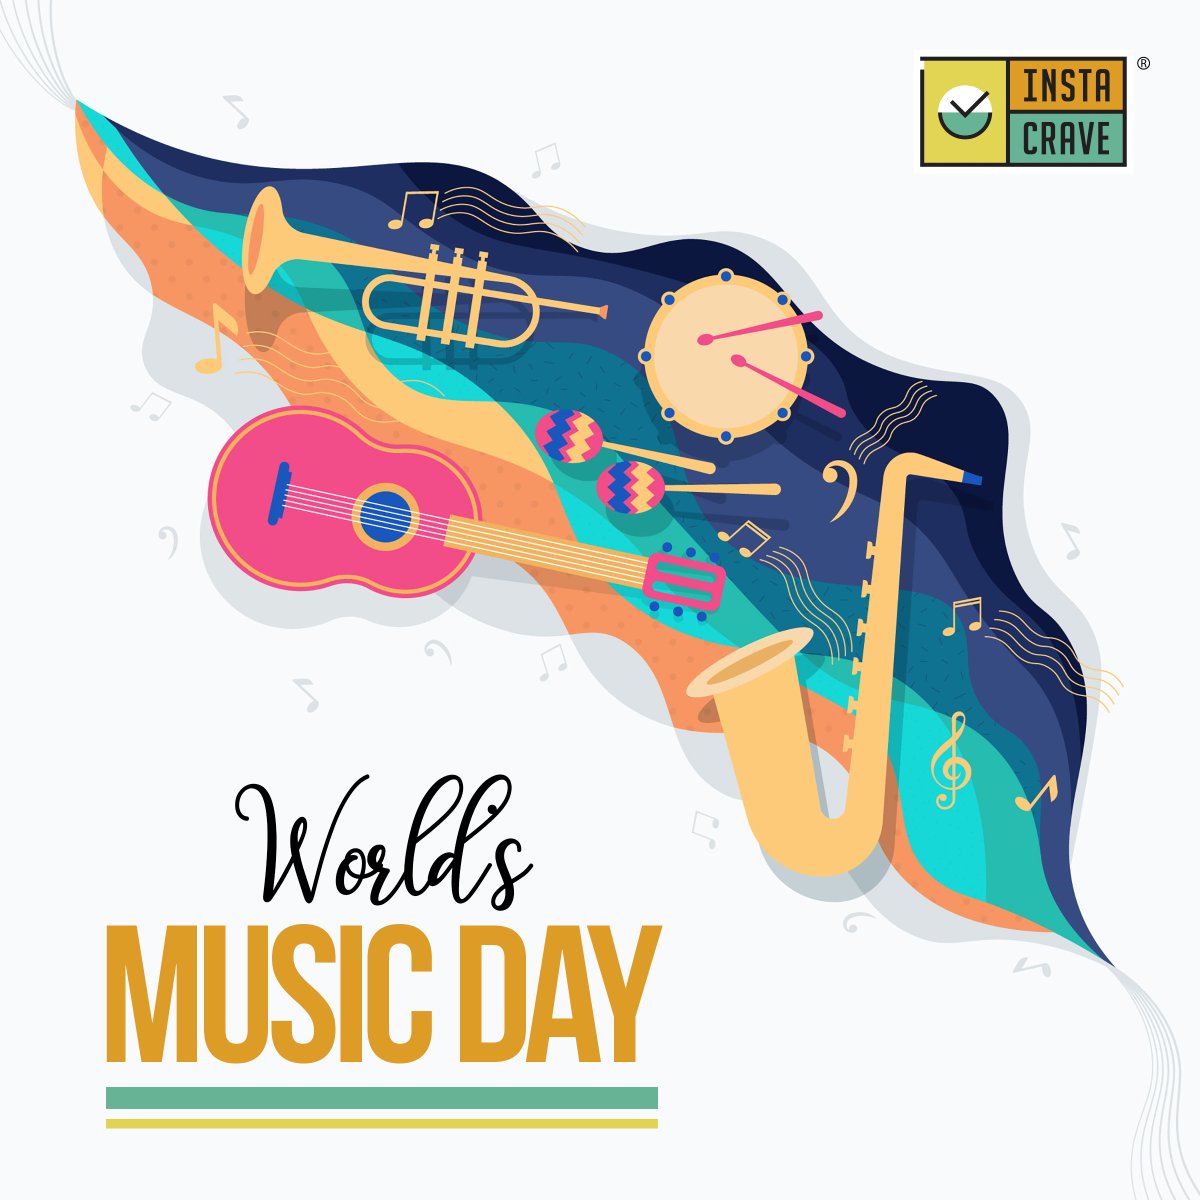 Always cherish the soul of music, the soul of food and the soulful love ♥️♥️ Happy World's Music Day to all the beautiful souls out there..😍😍 🎶🎶 . . . #instacrave #thebeercafe #worldmusicday #worldmusicday2020 #musicday #music #musicandbeer #musicandfood #foodandmusic